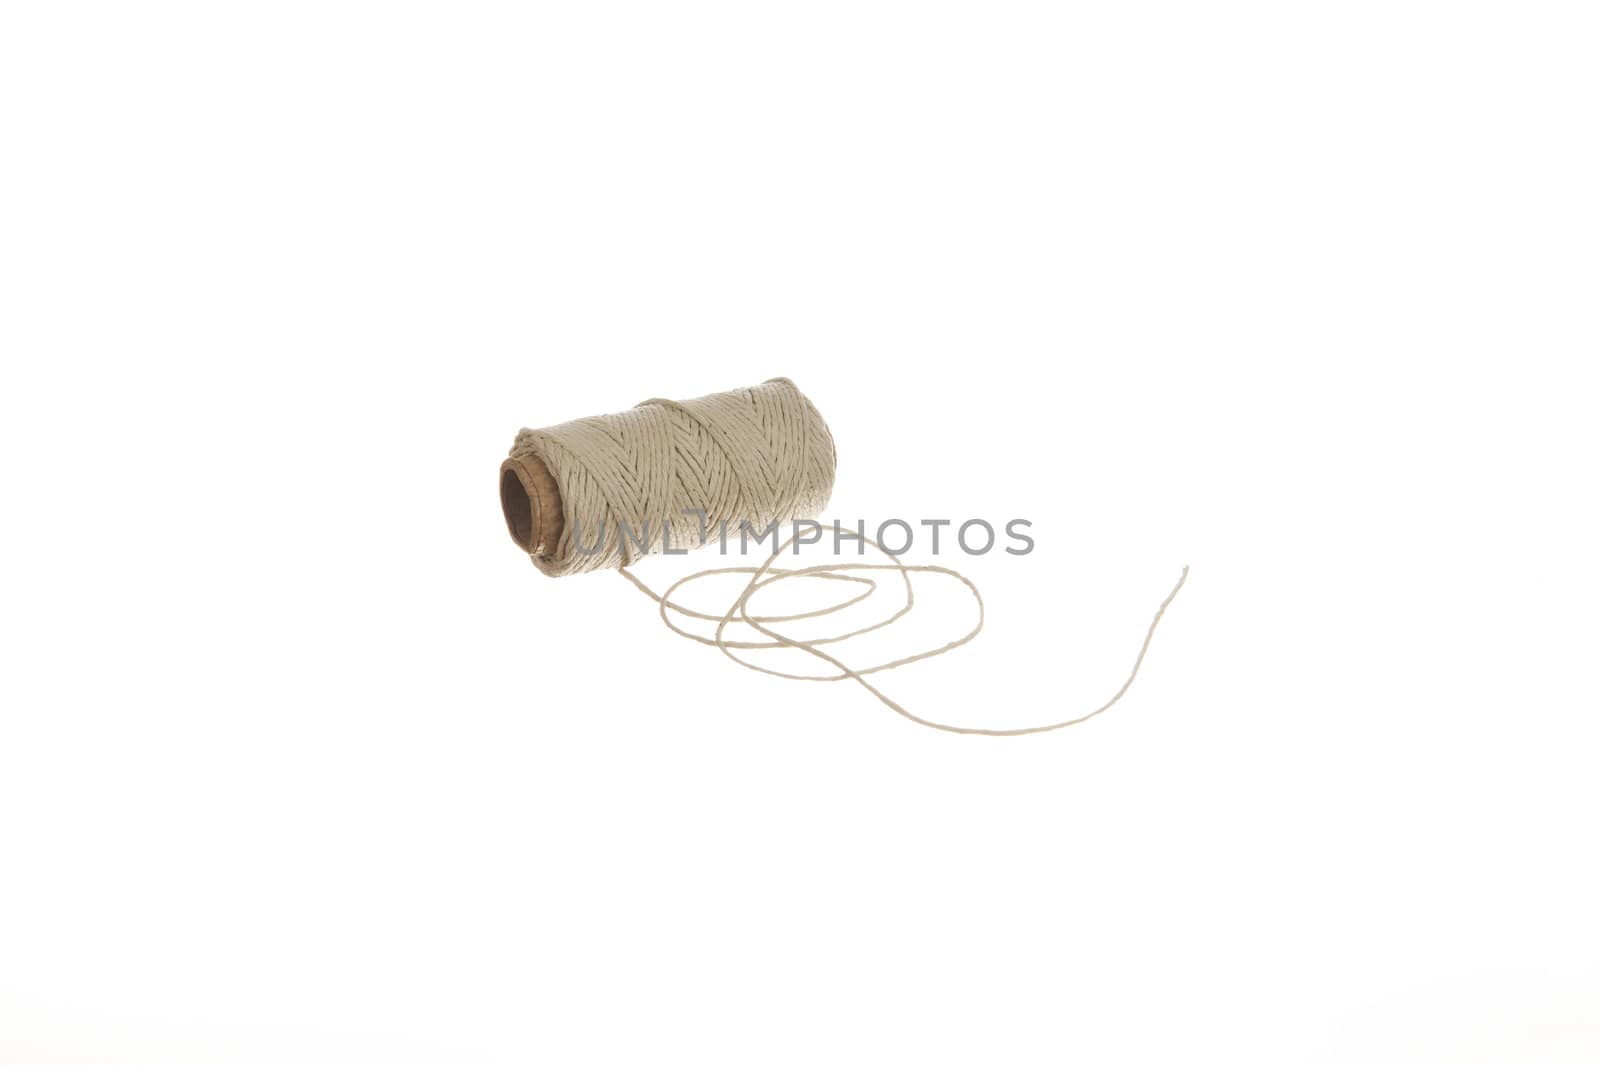 Natural hemp cord isolated on white background by Eydfinnur